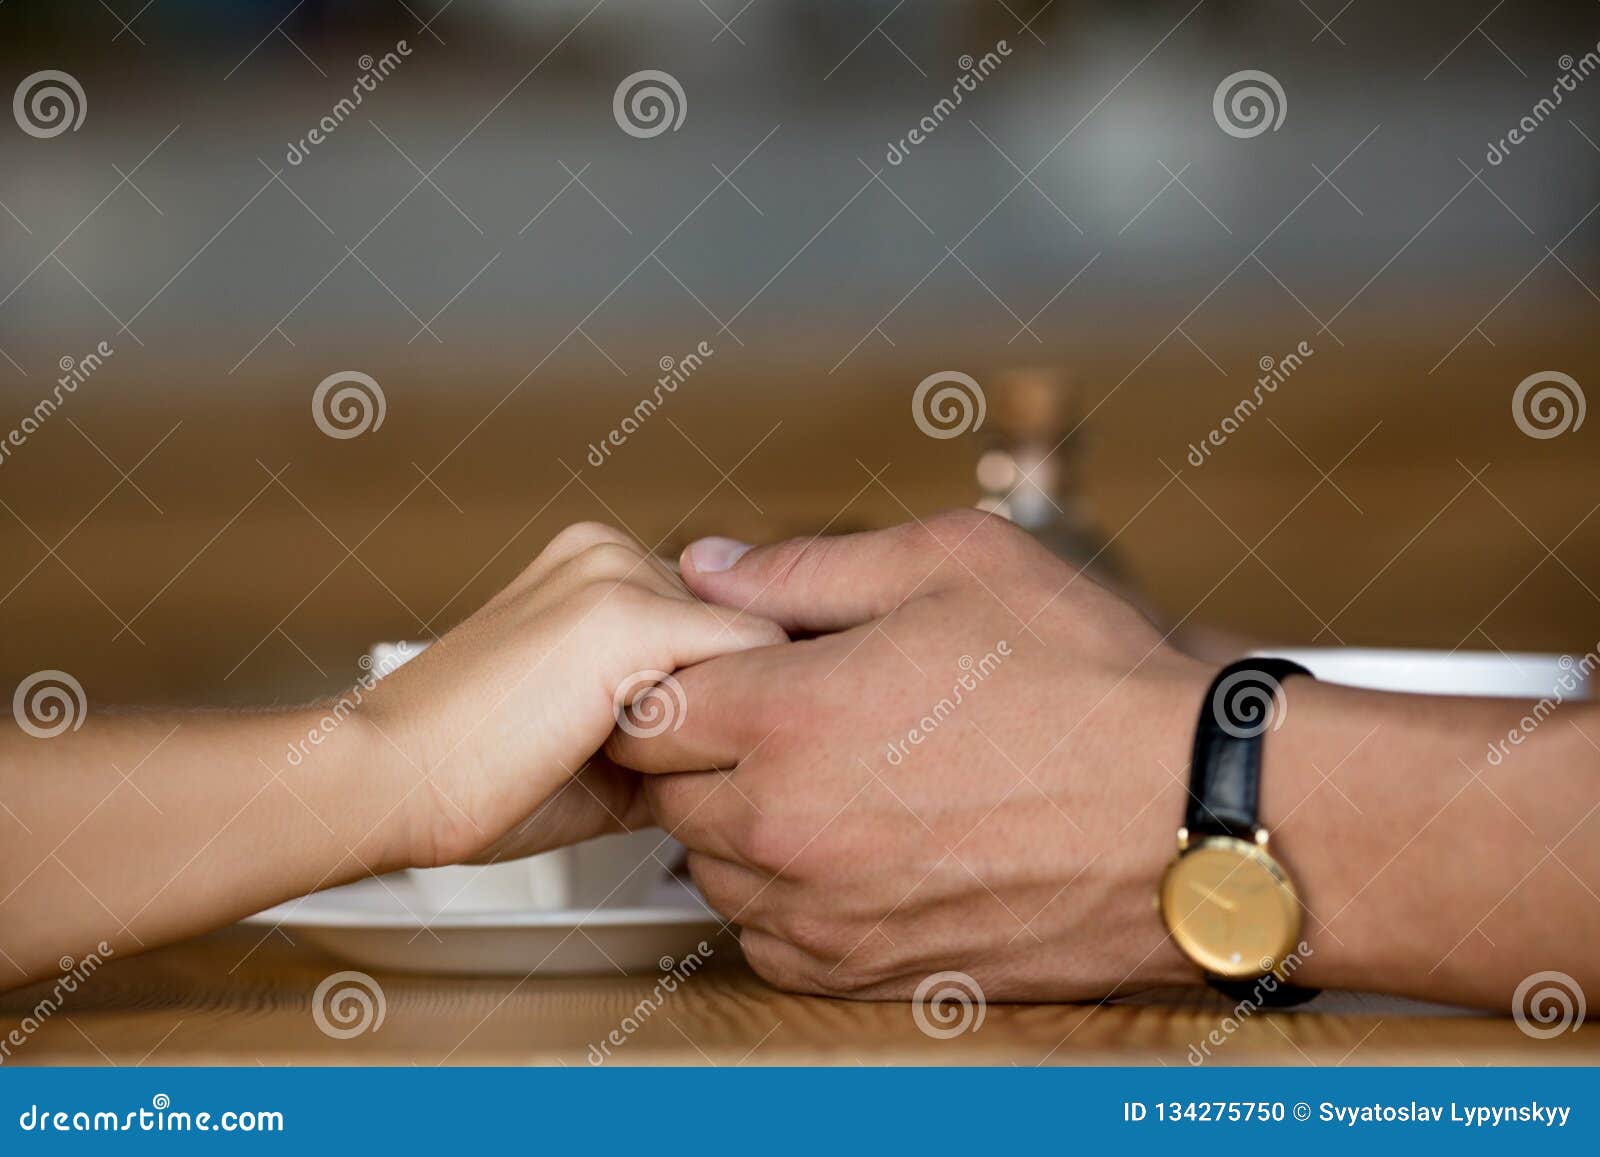 cute couple holding hands